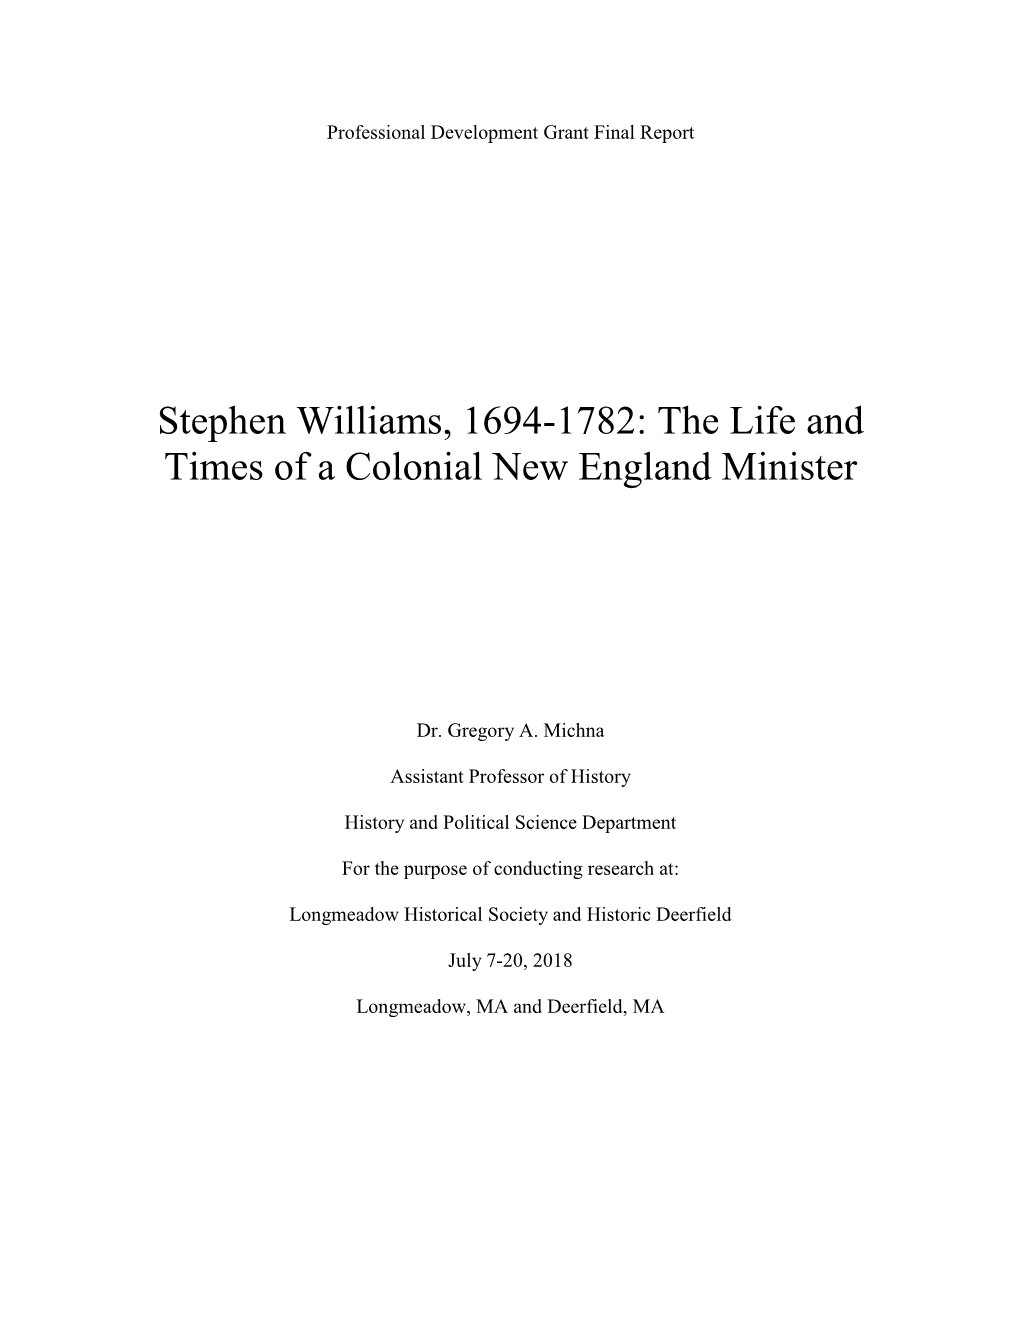 The Life and Times of a Colonial New England Minister